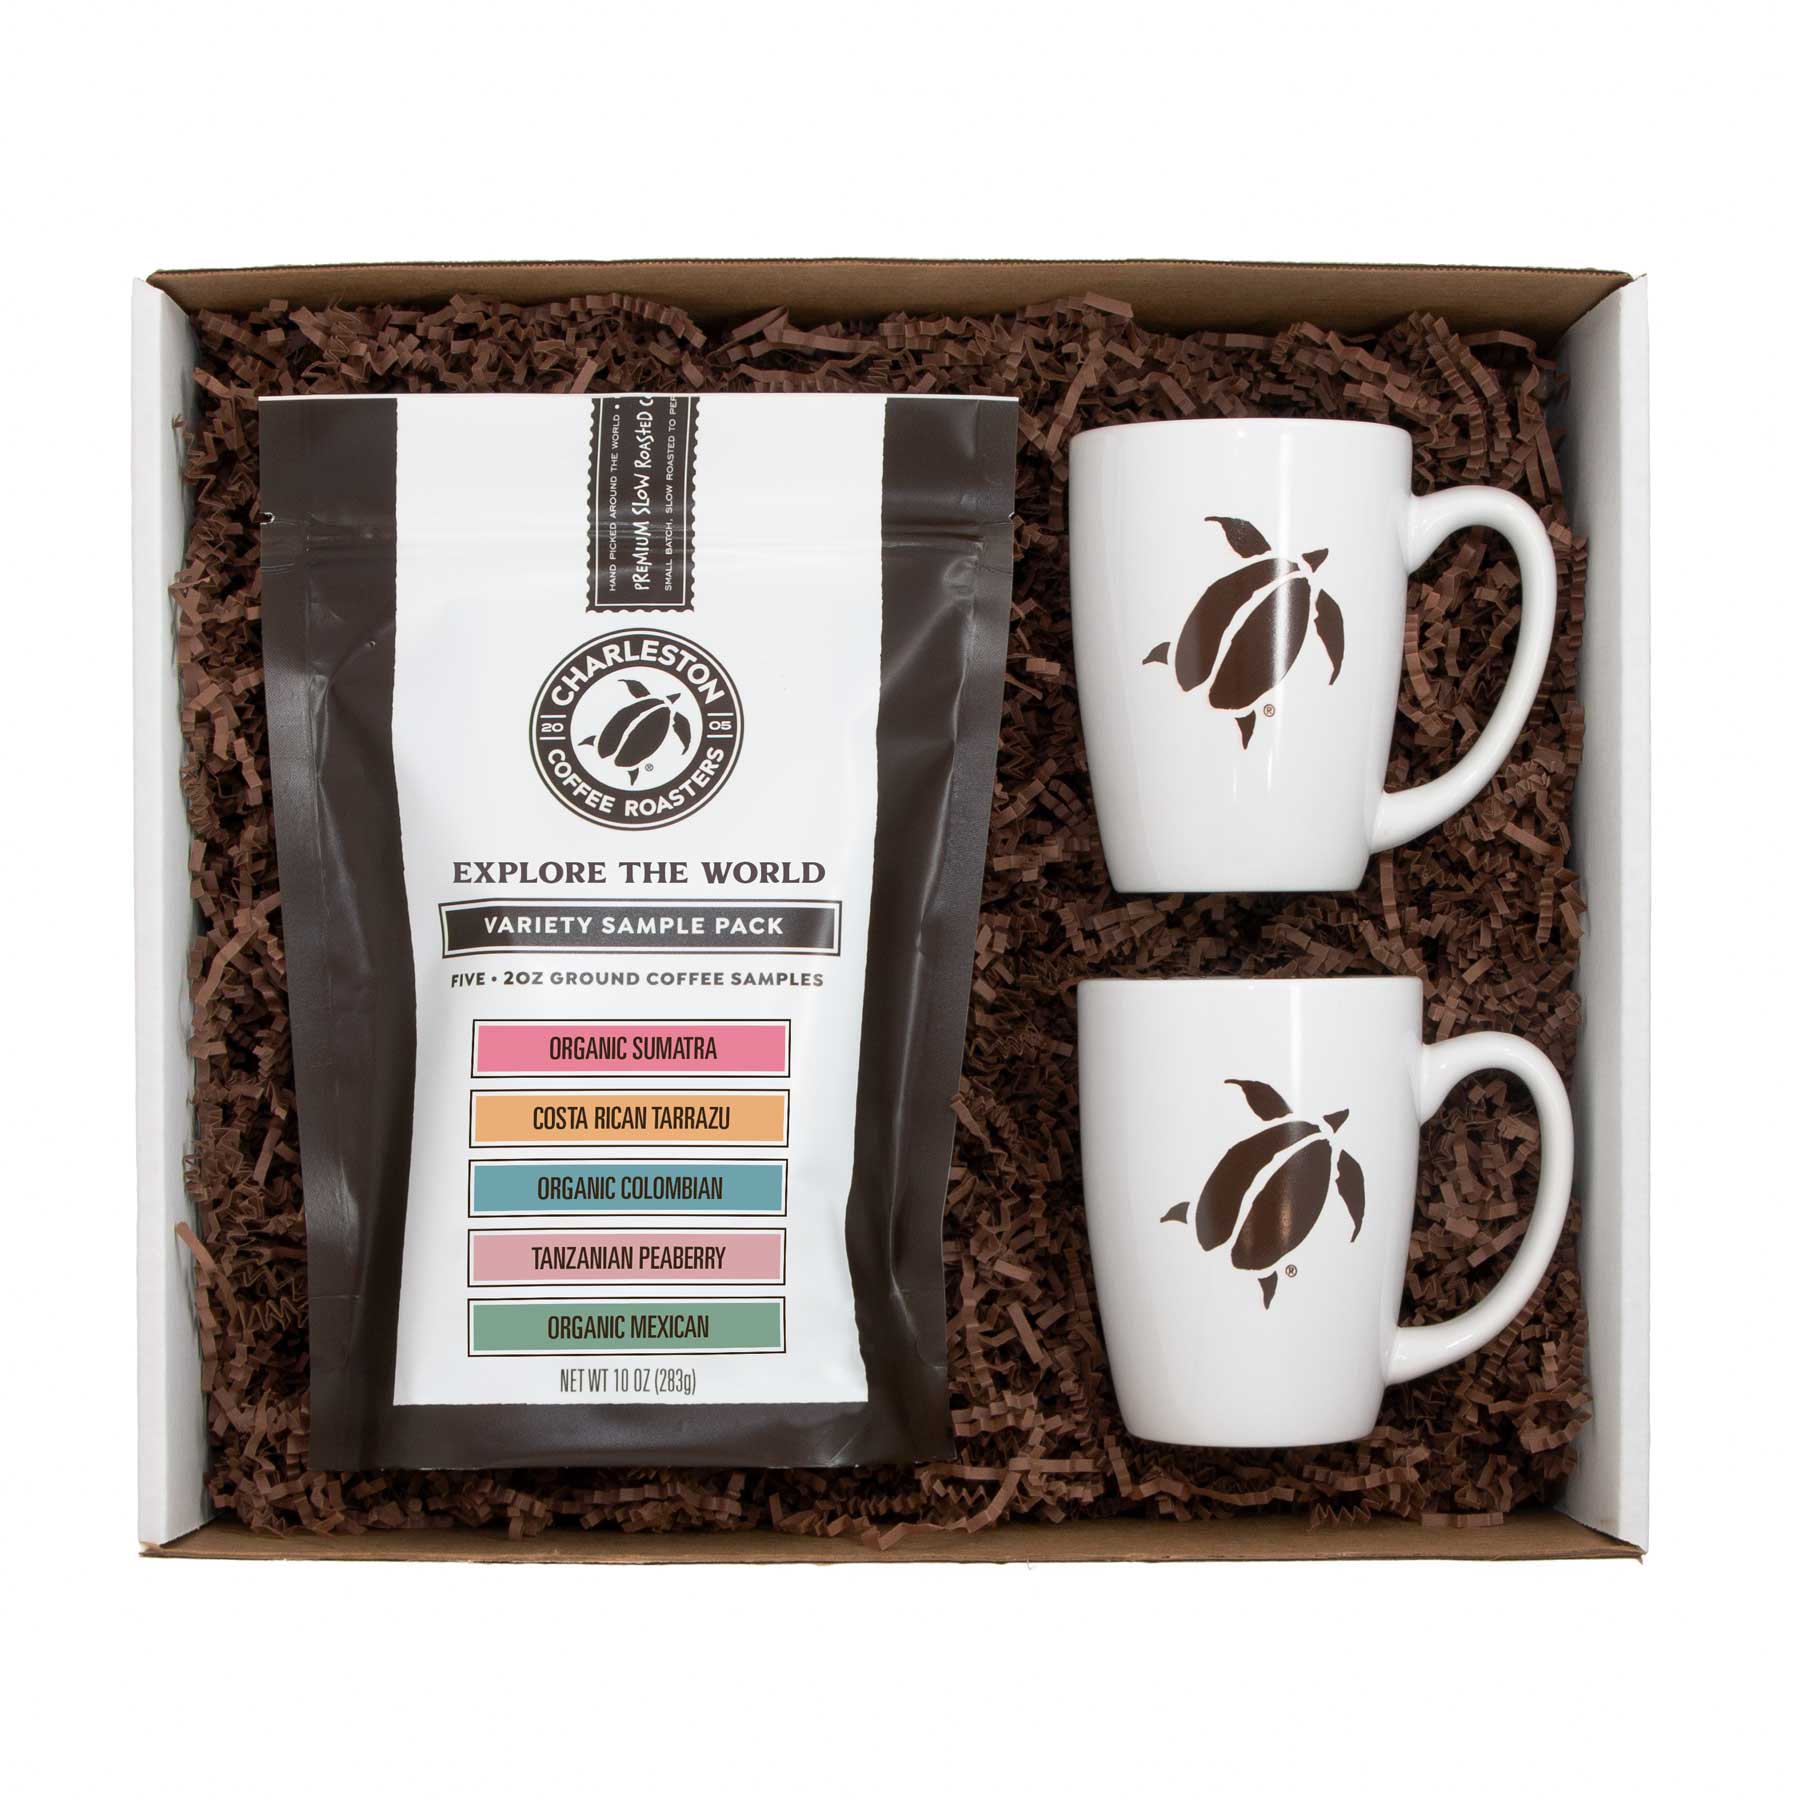 Explore the world variety sample gift pack